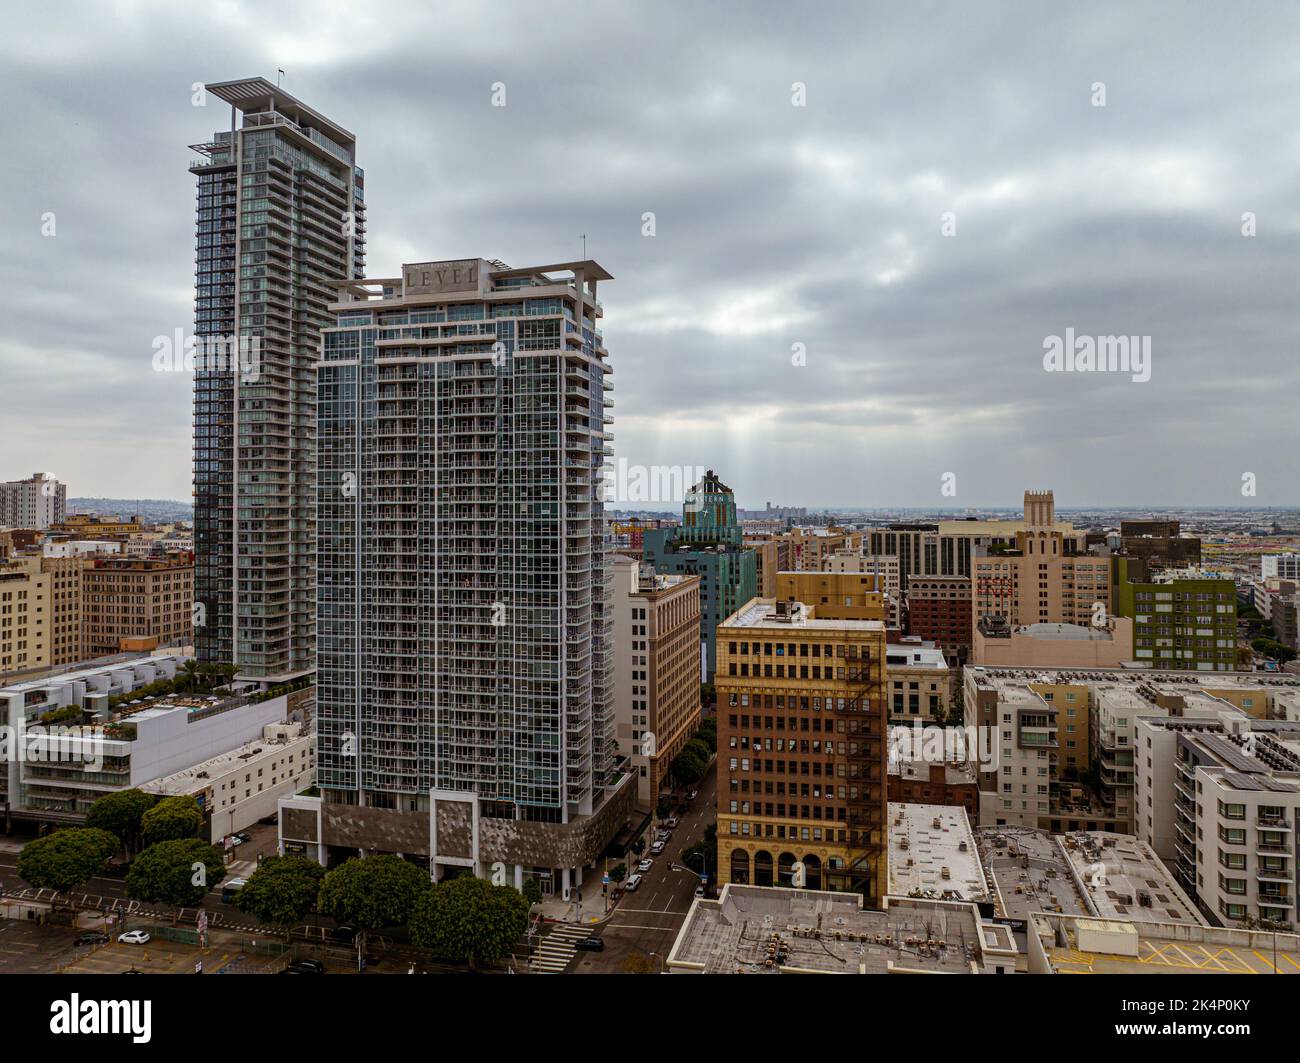 South Park Neighborhood in Downtown Los Angeles Stock Photo - Alamy